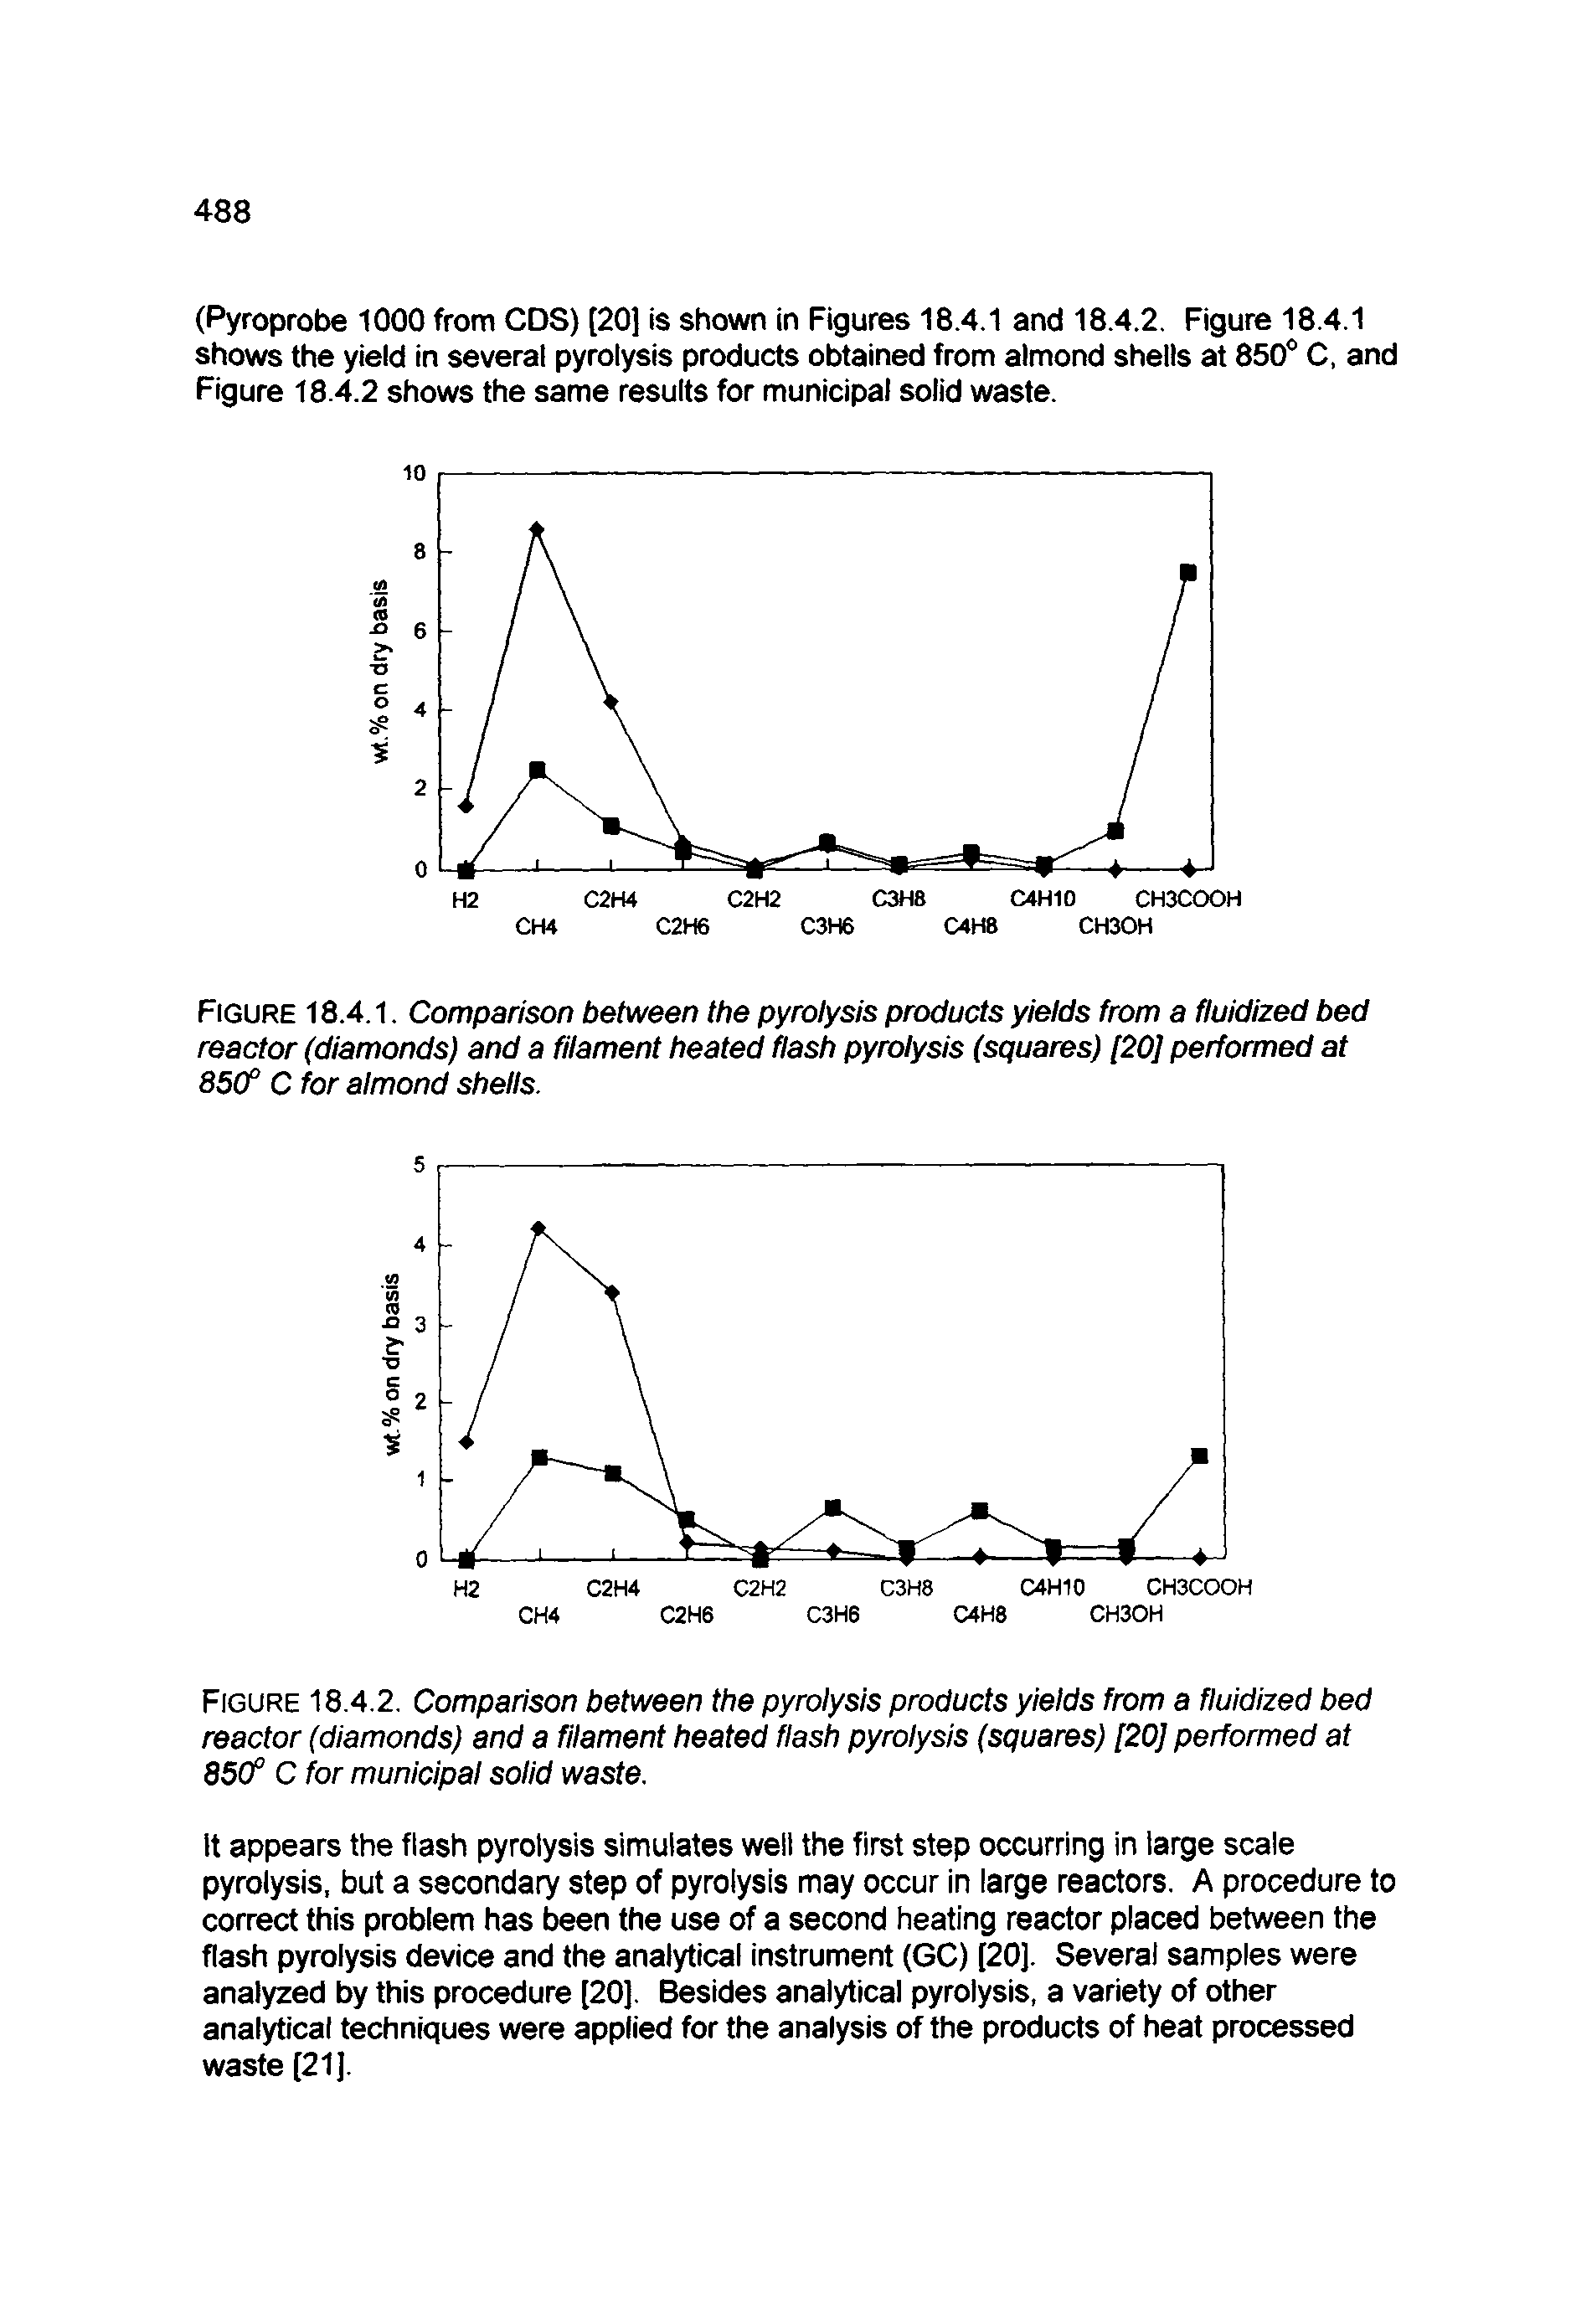 Figure 18.4.2. Comparison between the pyrolysis products yields from a fluidized bed reactor (diamonds) and a filament heated flash pyrolysis (squares) [20] performed at 85(f C for municipal solid waste.